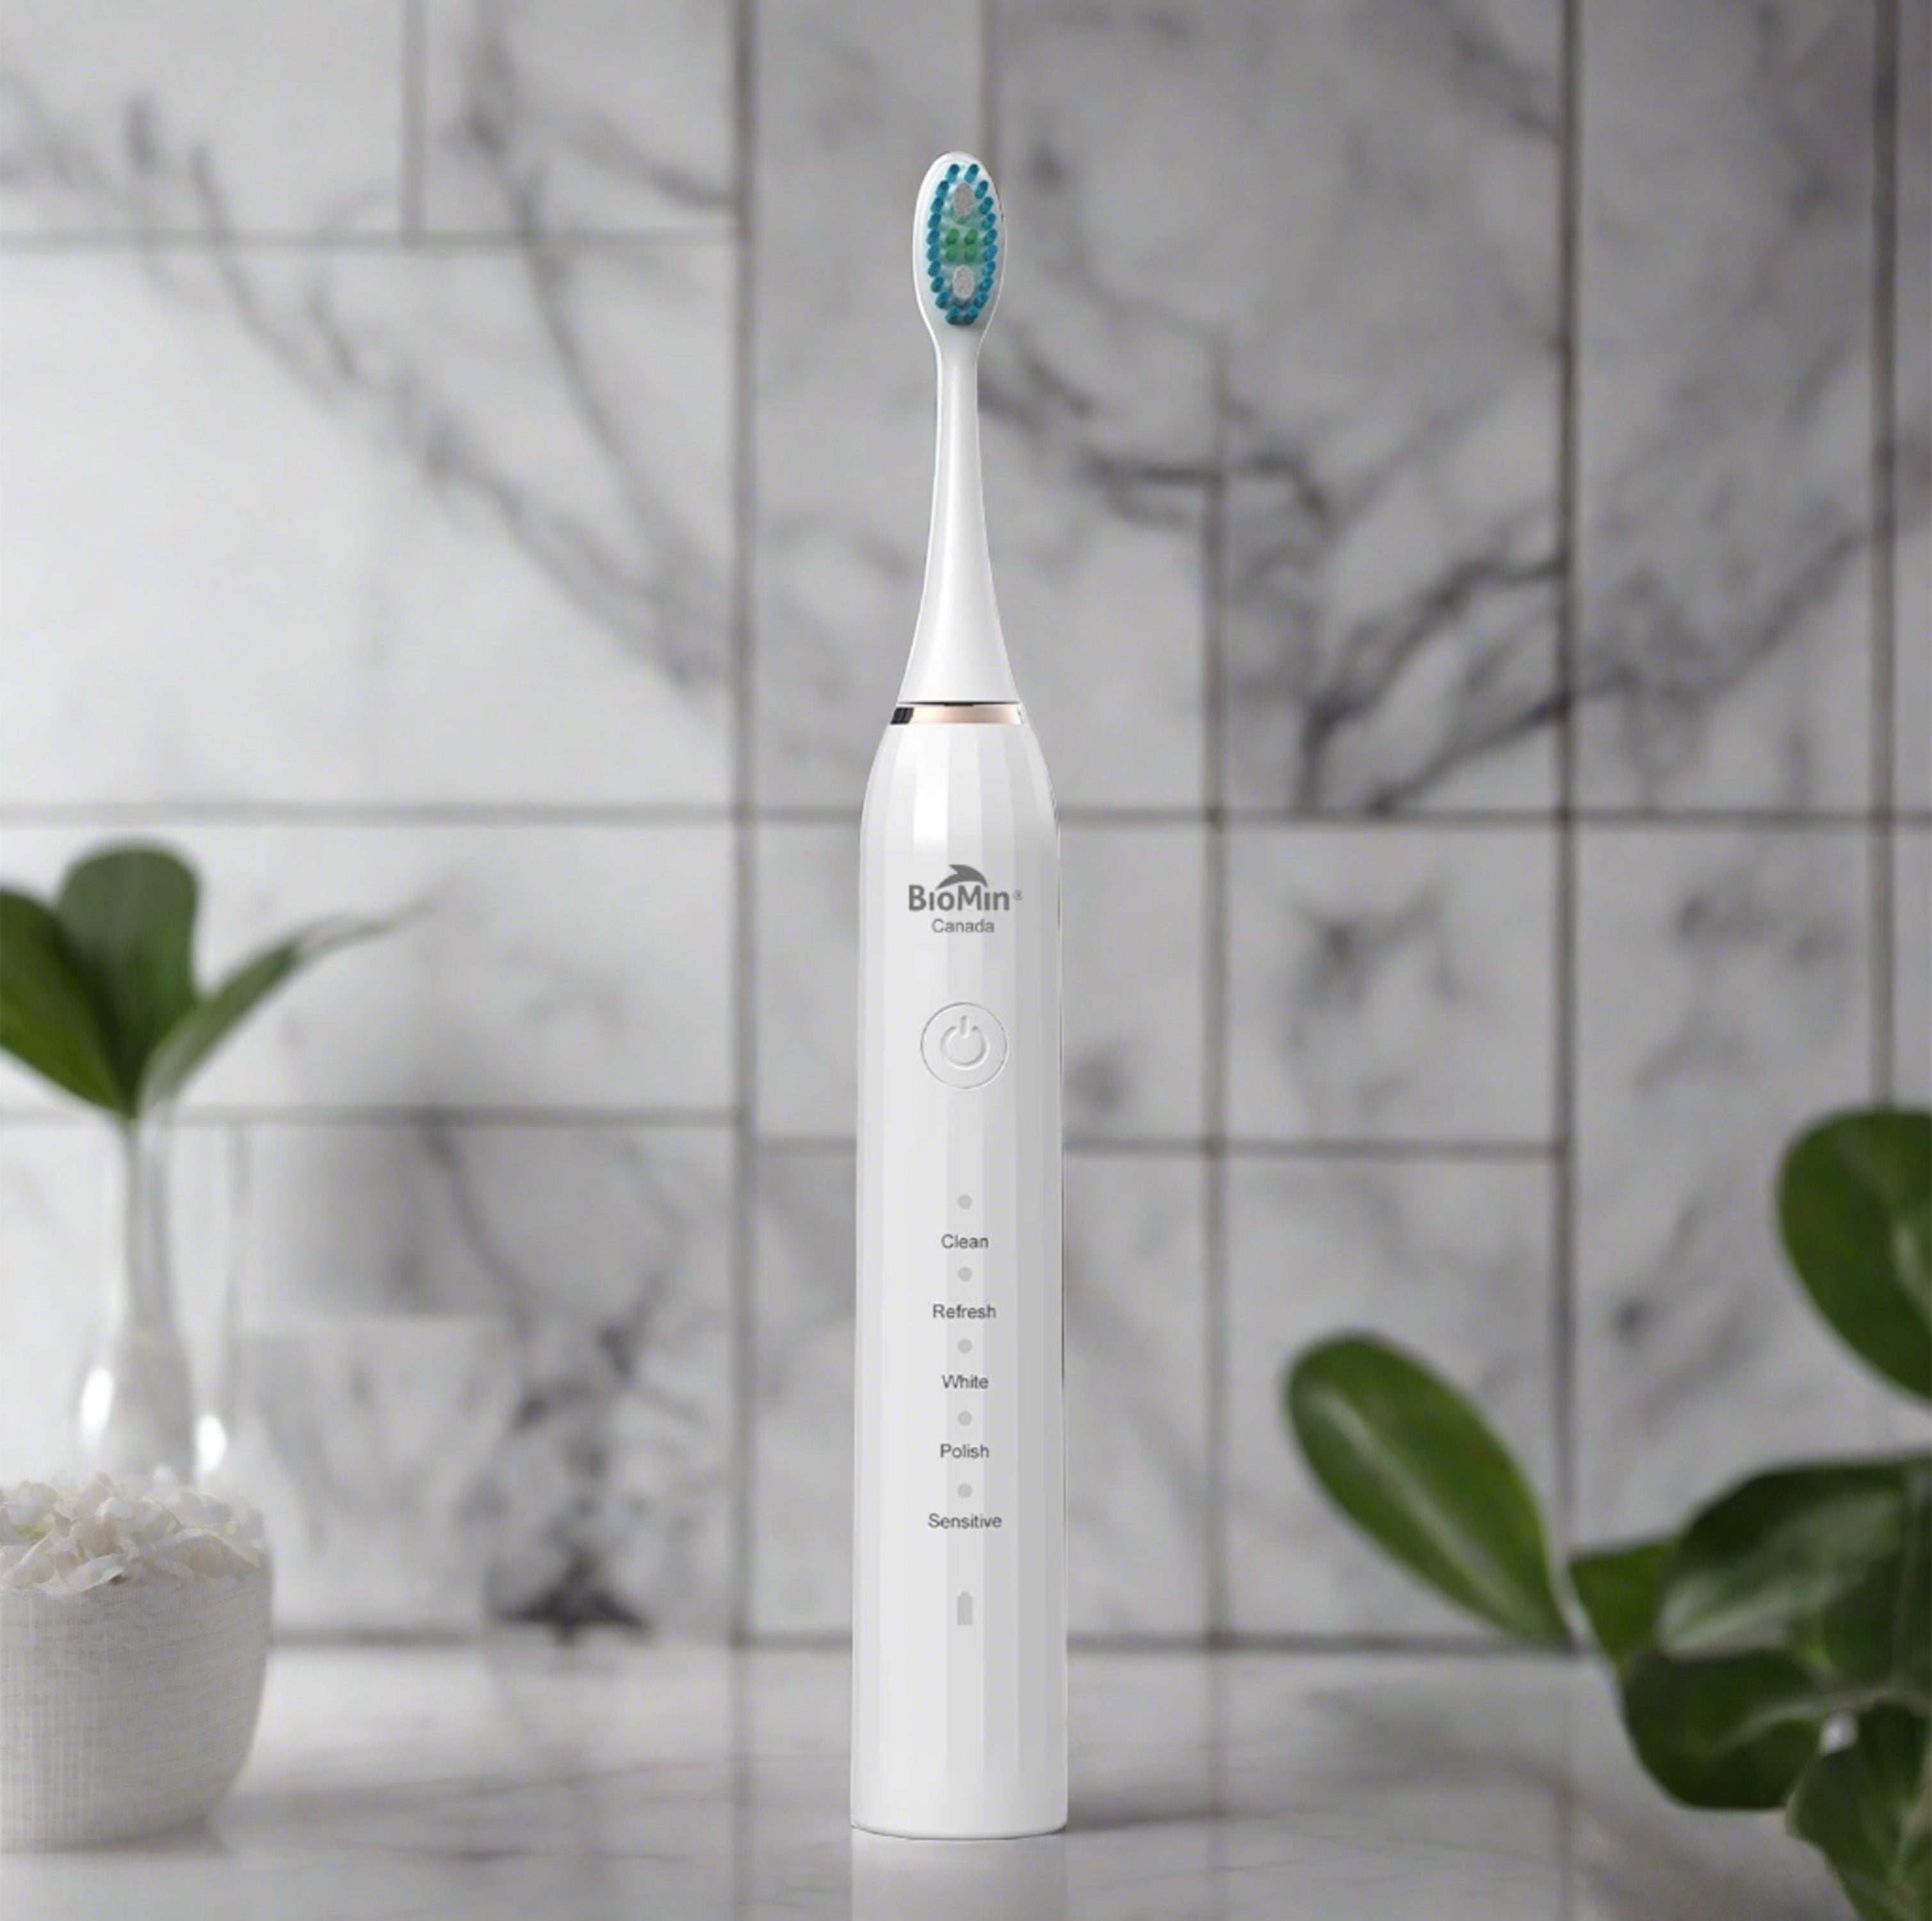 Sonic-Care Pro Electric Toothbrush